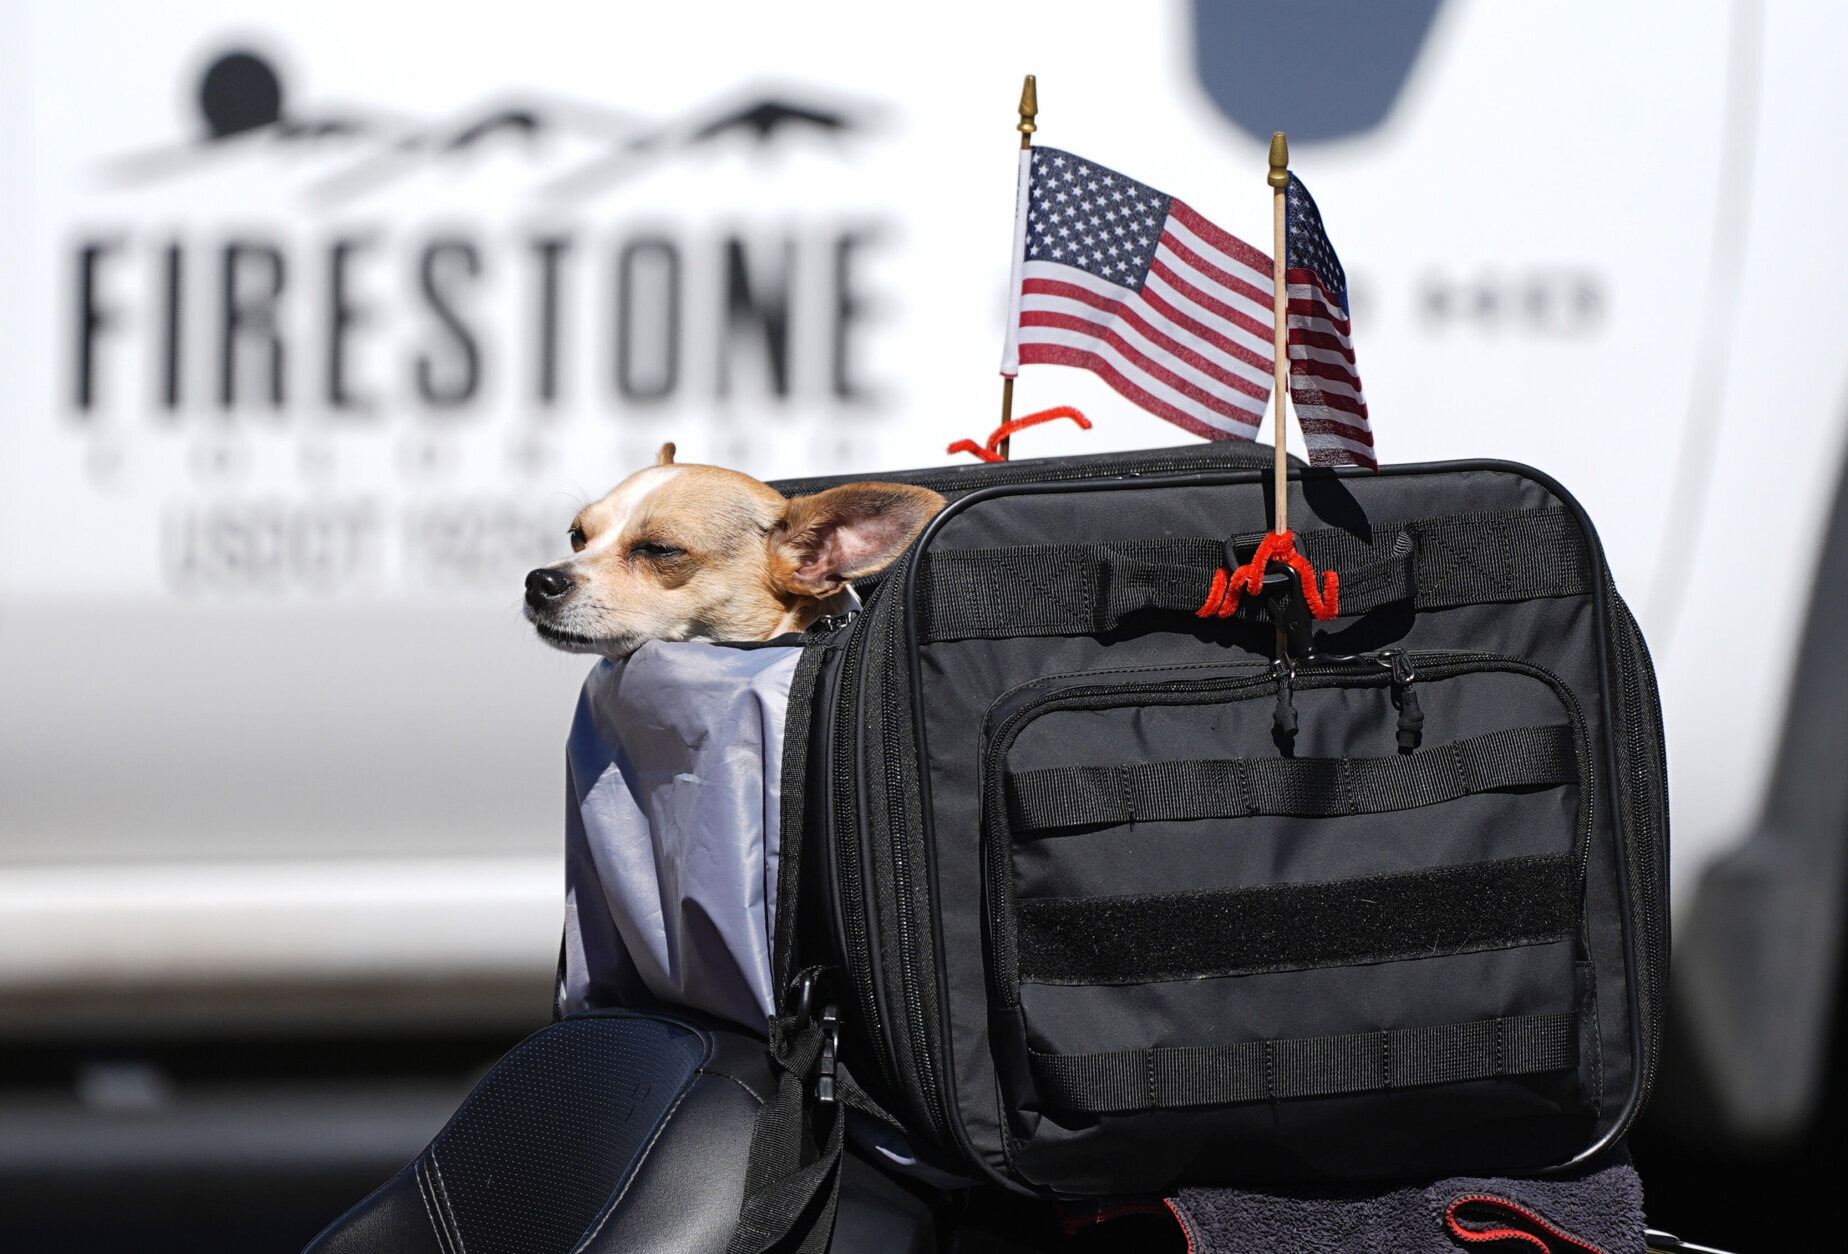 A dog rides in a carrier adorned with American flags on the back of a motorcycle